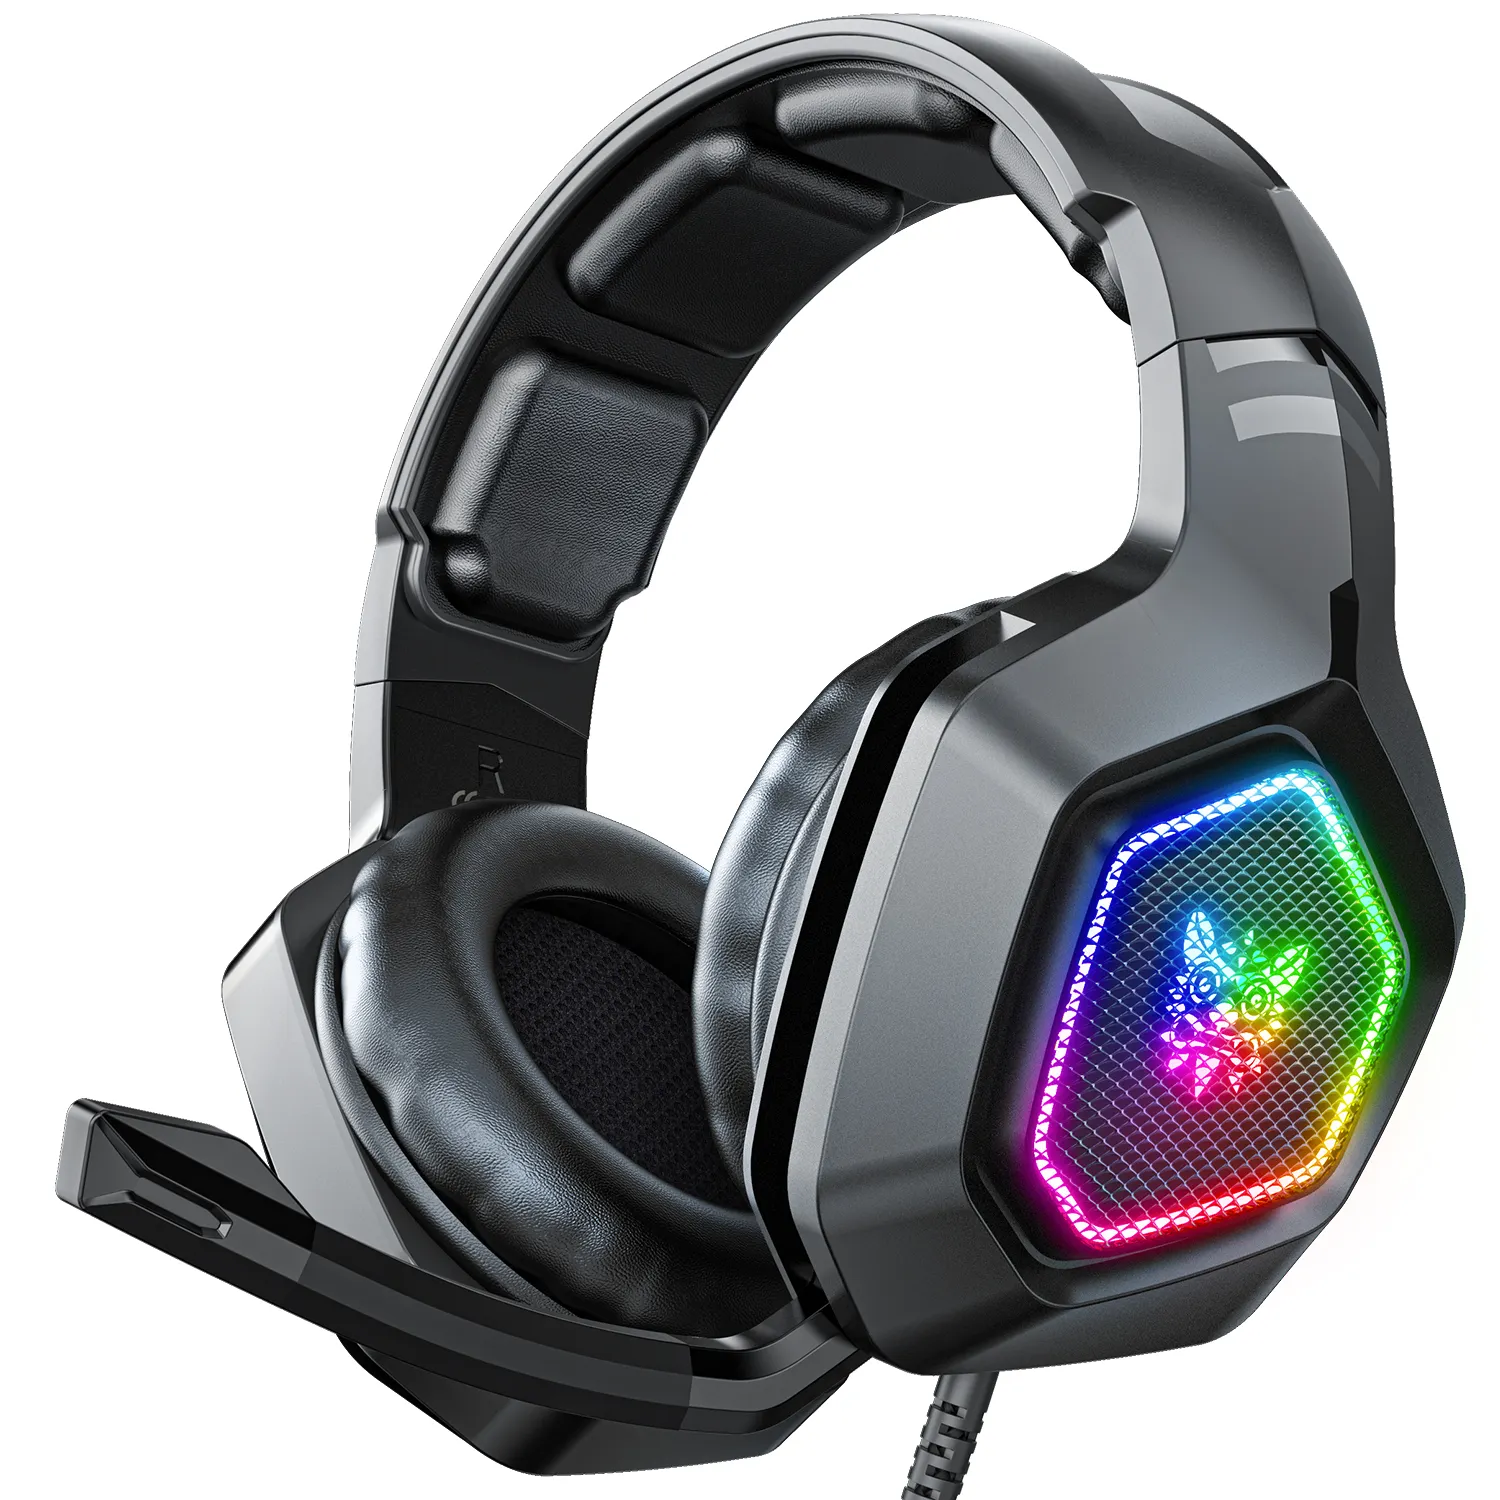 Onikuma New Arrival K10 Cool RGB Flowing LED 7.1 Surround Sound Gaming Headphones Headsets With Foldable Microphone